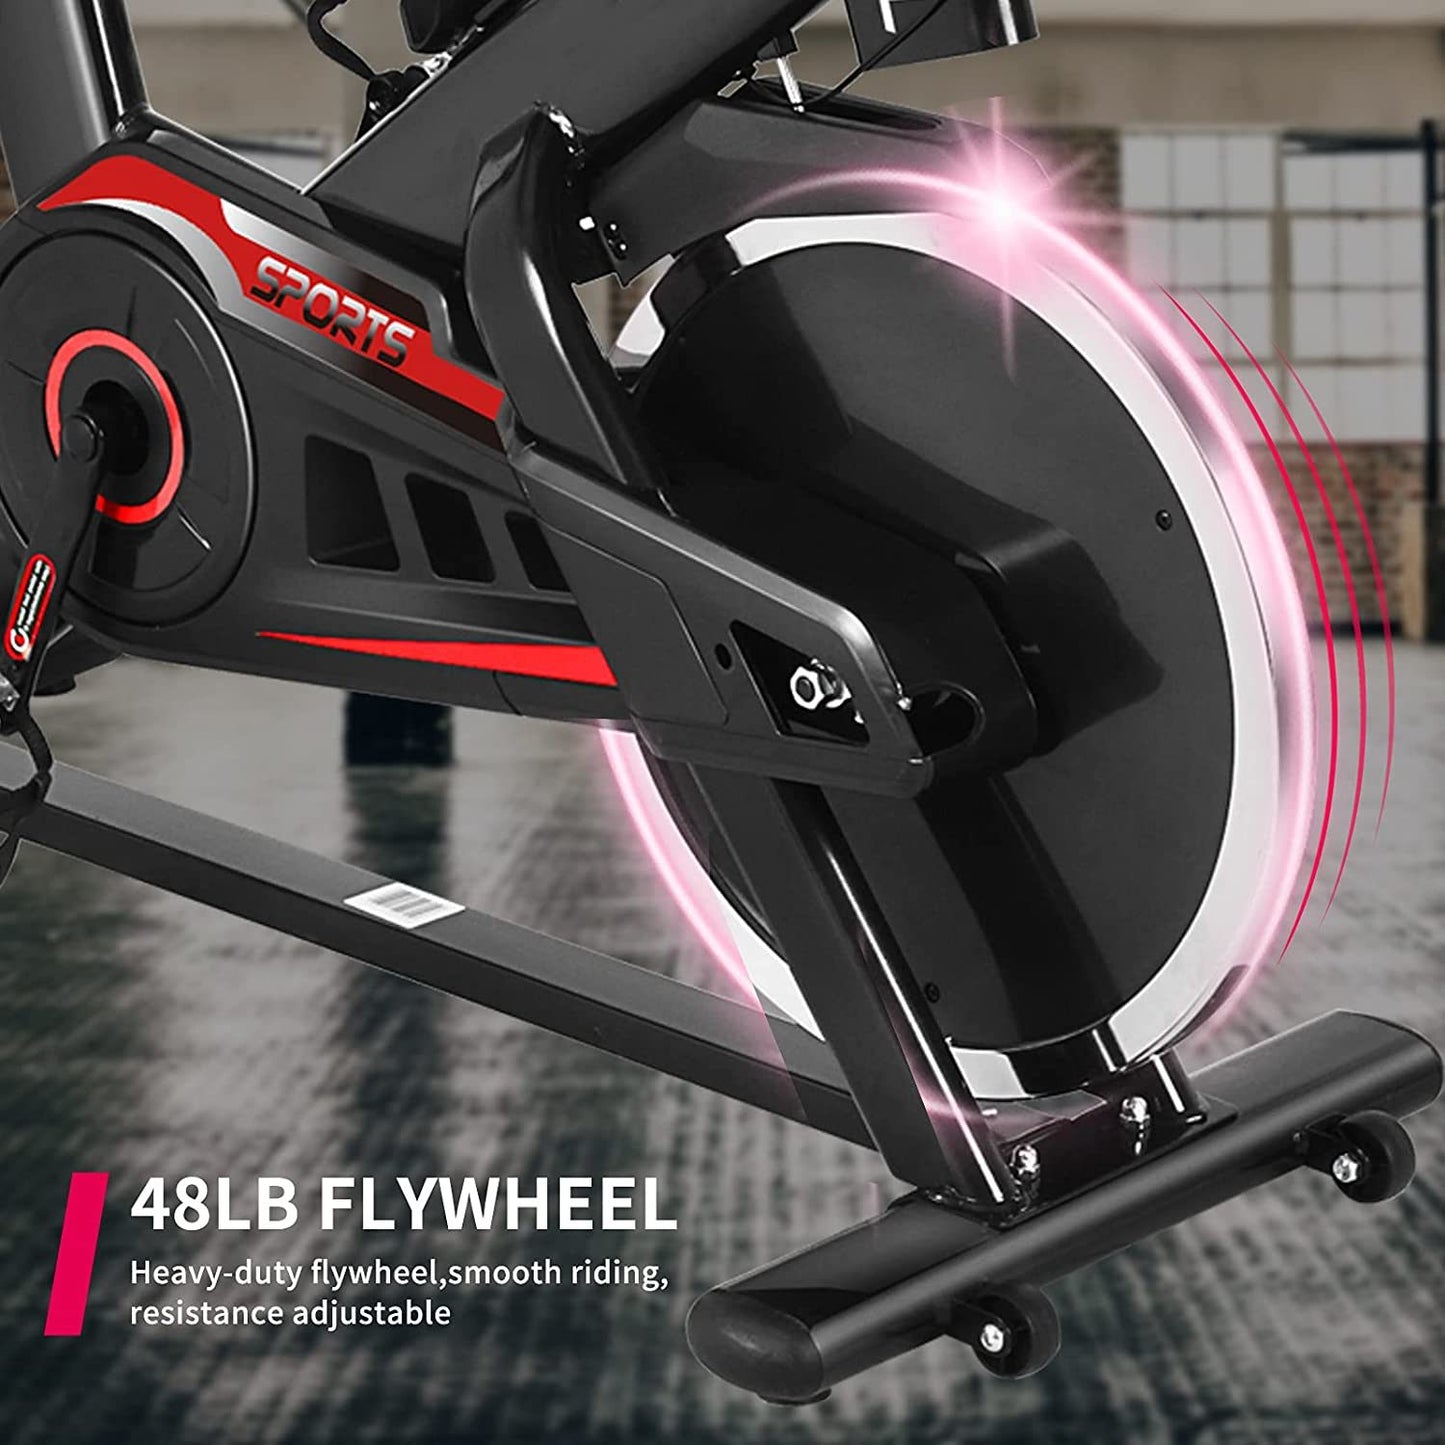 Murtisol Indoor Cycling Stationary Bike,Exercise Bike with Adjustable Seat,Belt Drive,LCD Display,28.7 LBS Cast Iron flywheel Flywheel,264lbs Weight Capacity,for Home Gym Use RT